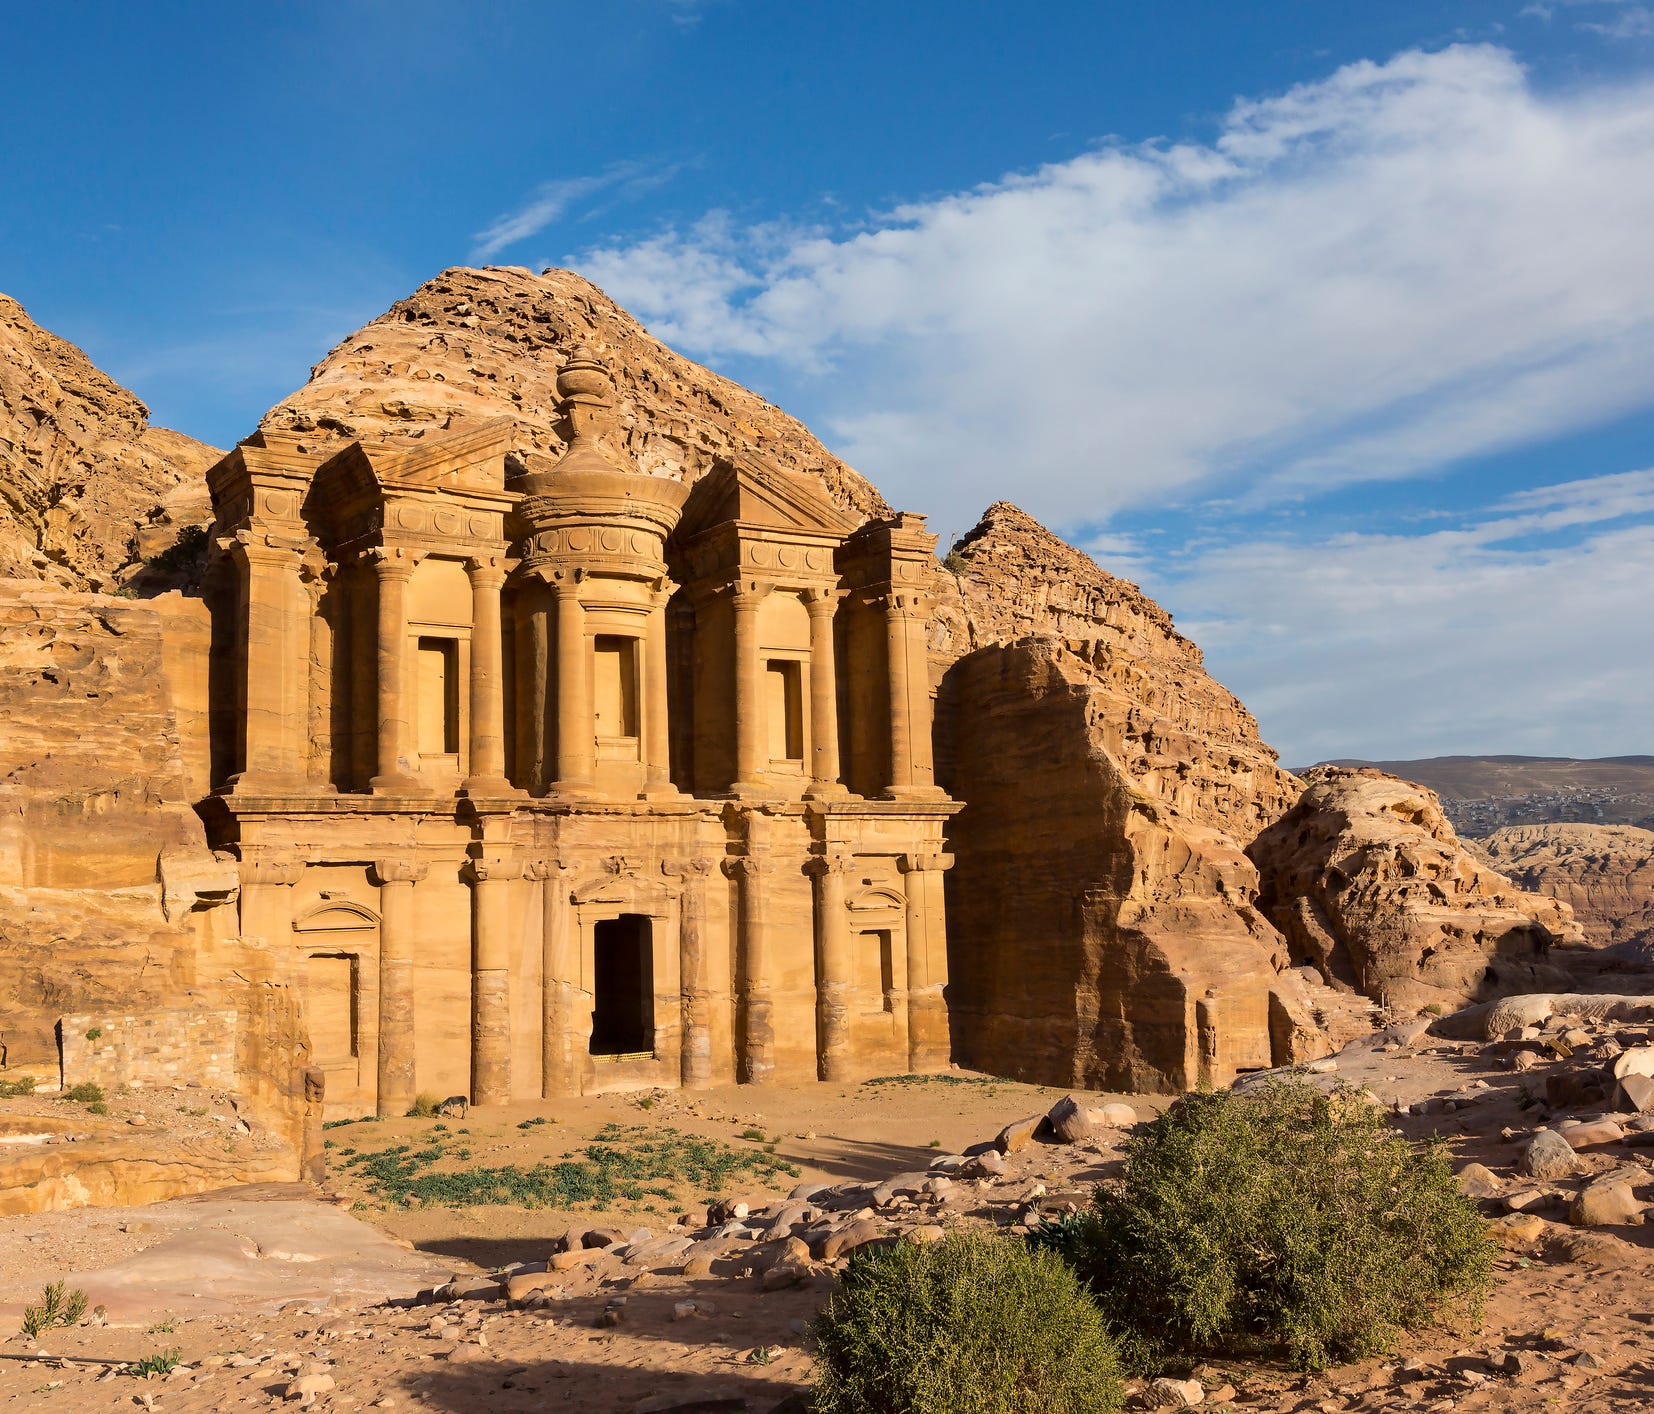 The Back Route to Petra, Jordan: Another lost city that draws a surprising number of crowds, Petra's crowded Treasury is easier to appreciate after a grueling hike through the remote Petra Basin from Little Petra — a smaller pocket of sandstone-carve